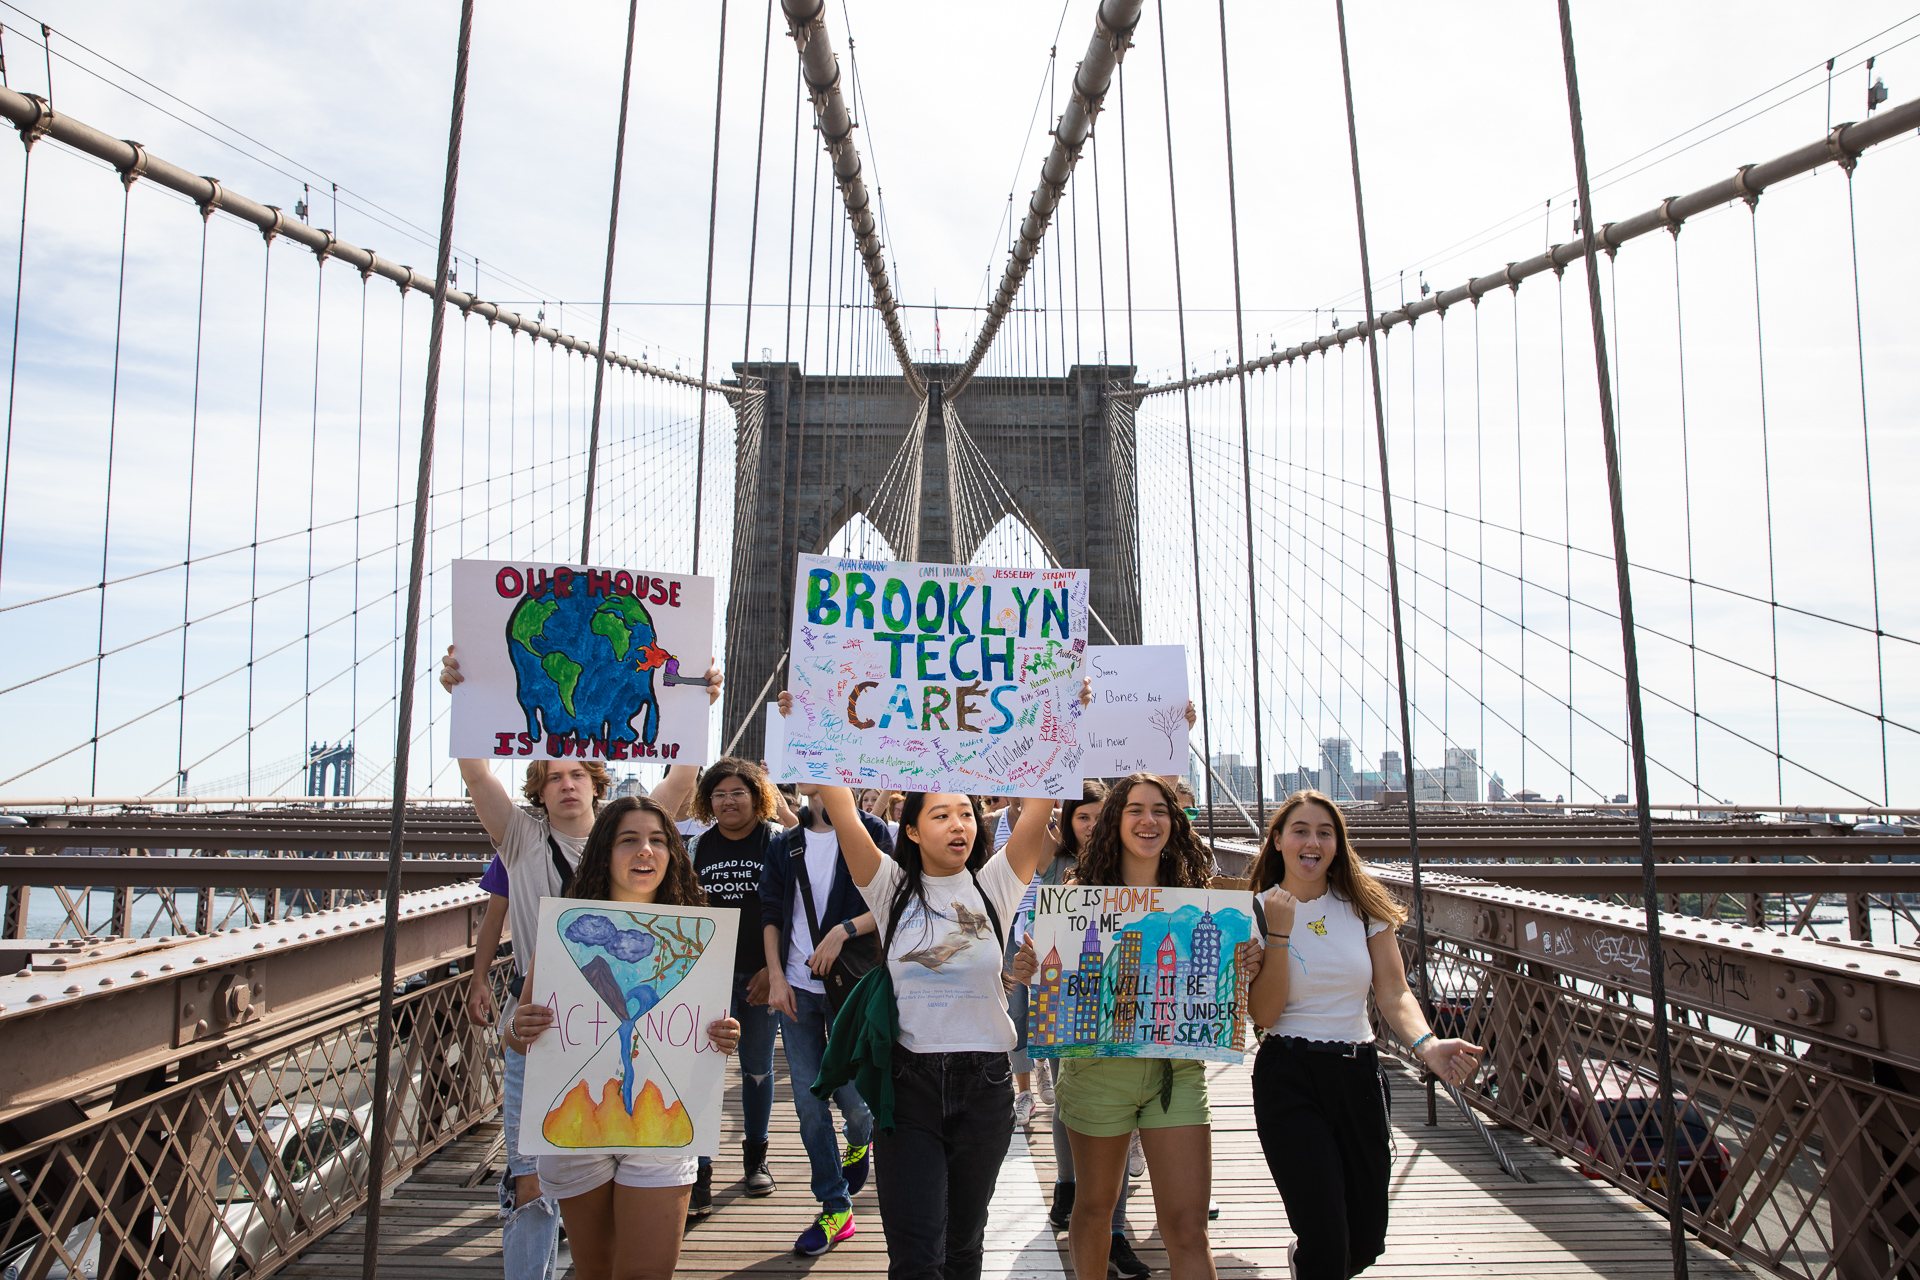 Students march over the Brooklyn Bridge while making their voices heard.